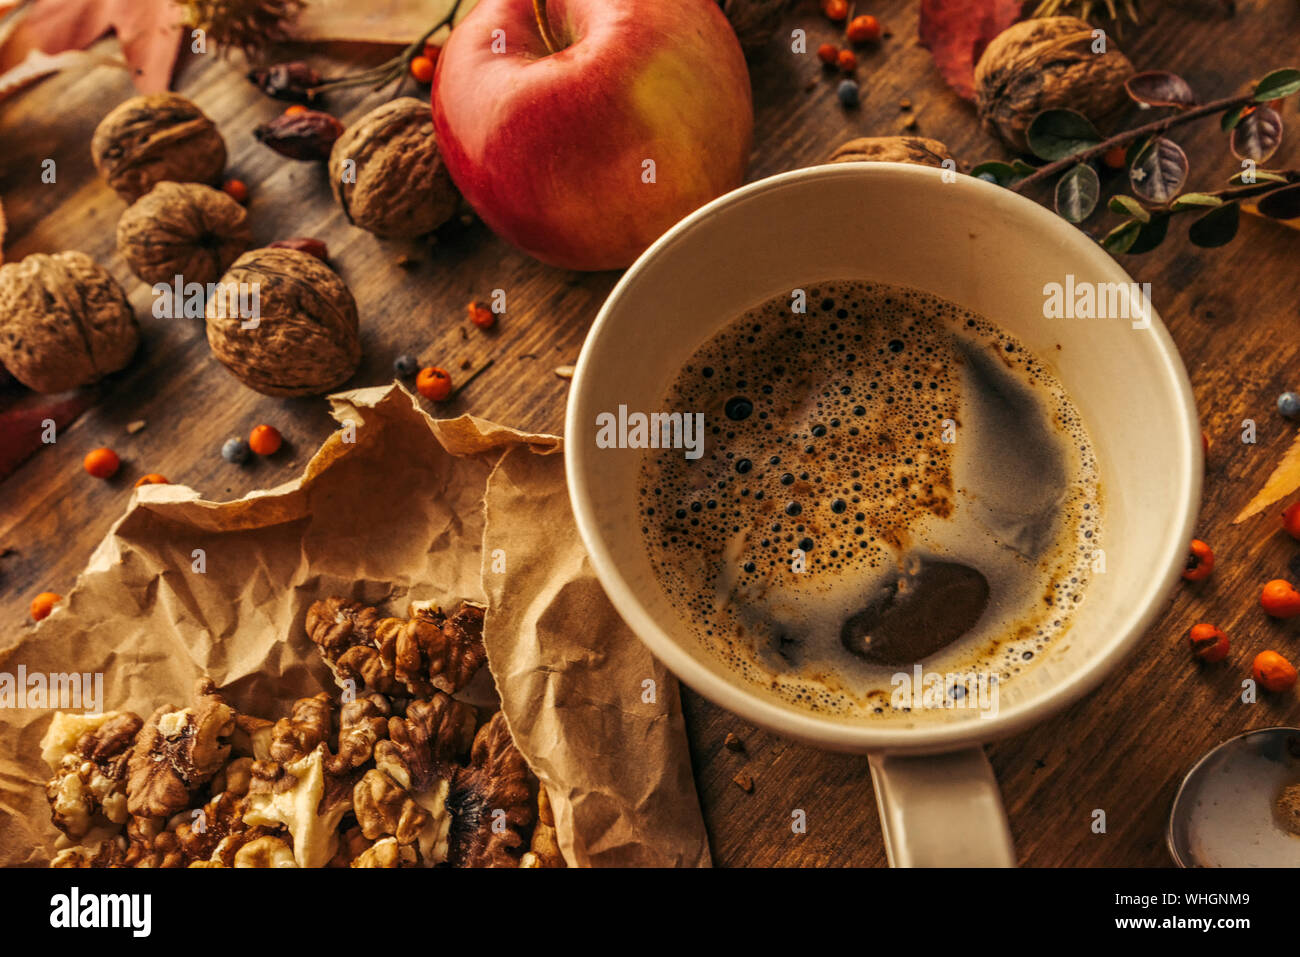 Enjoying fruits of autumn - apple, coffee and walnut on table for Thanksgiving day concept Stock Photo